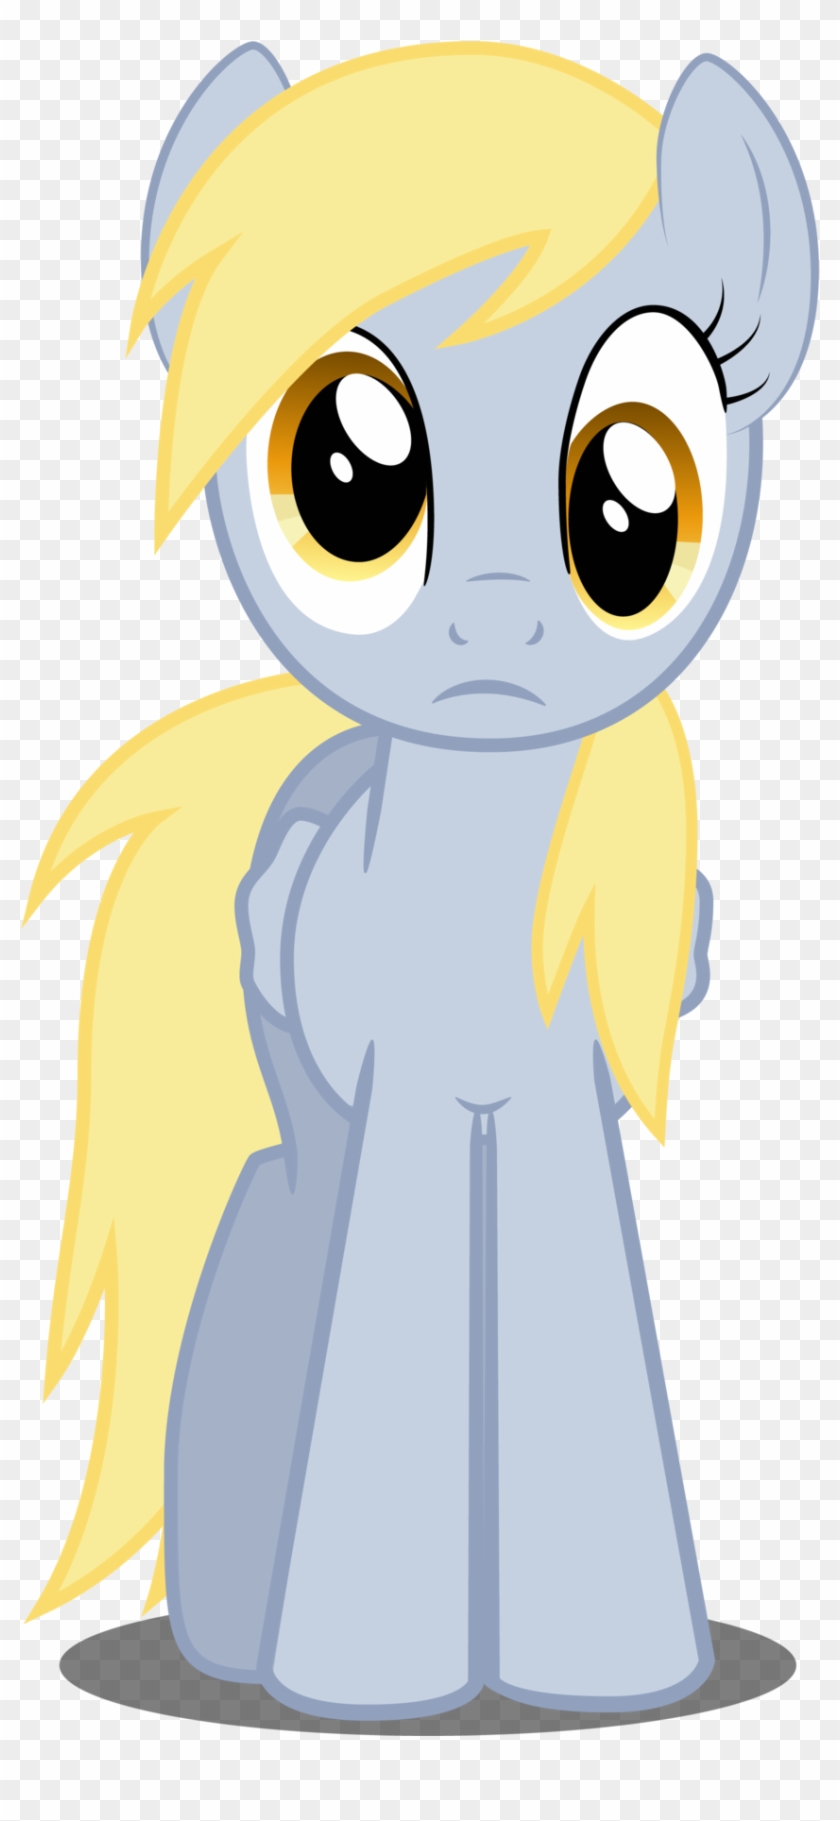 I Assure You, This Has Never Happened - Derpy Hooves Normal Eyes #819729